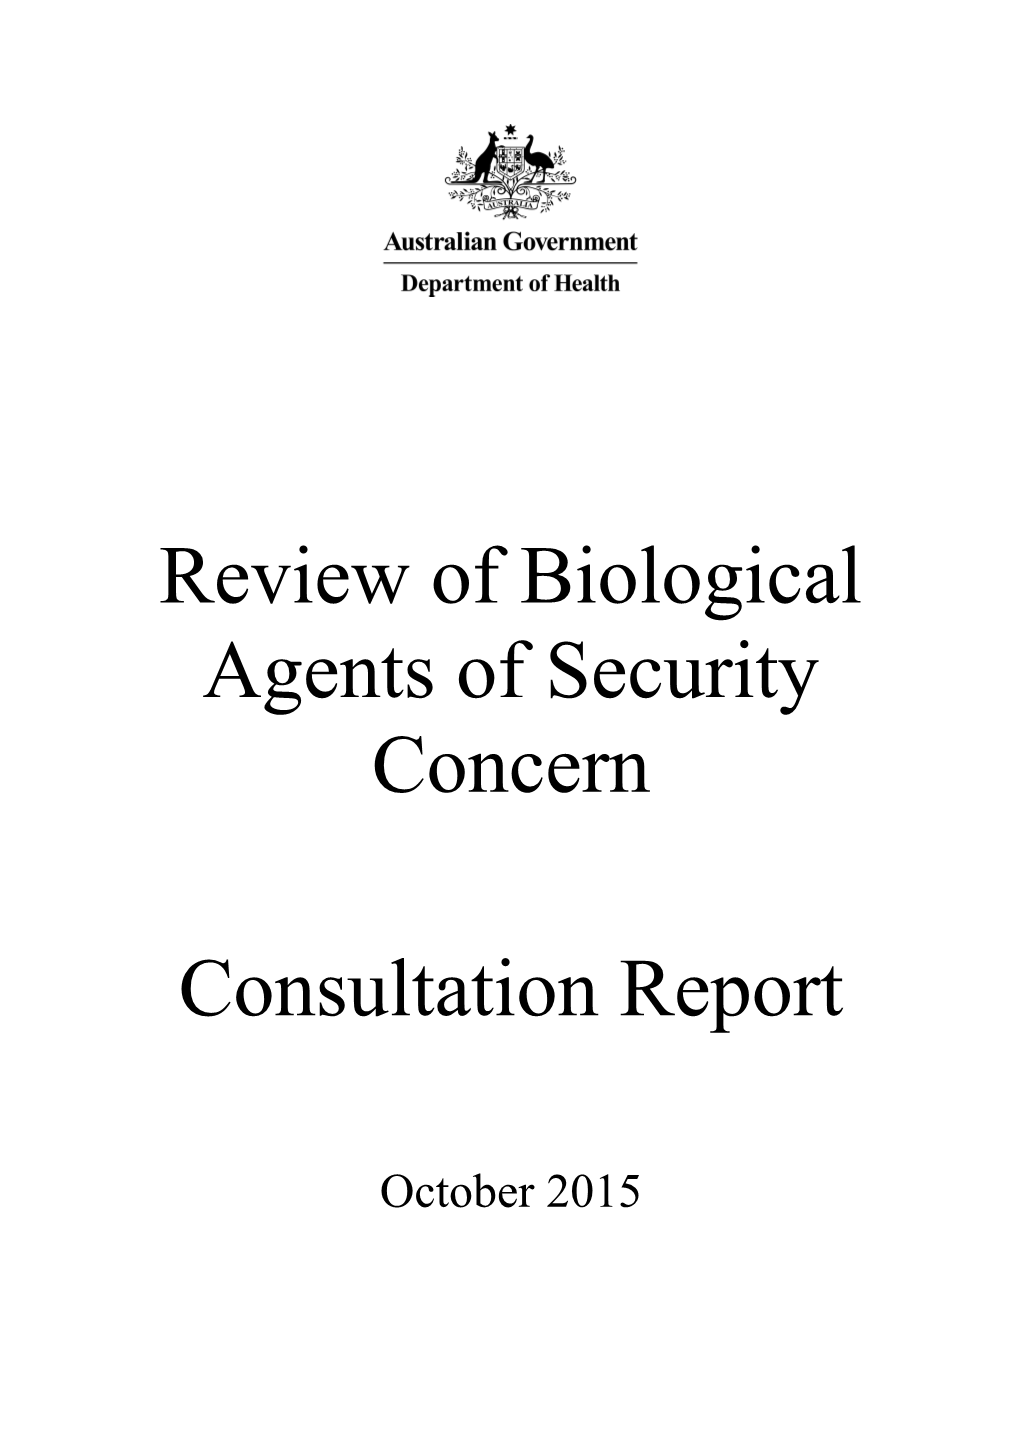 Review of Biological Agents of Security Concern